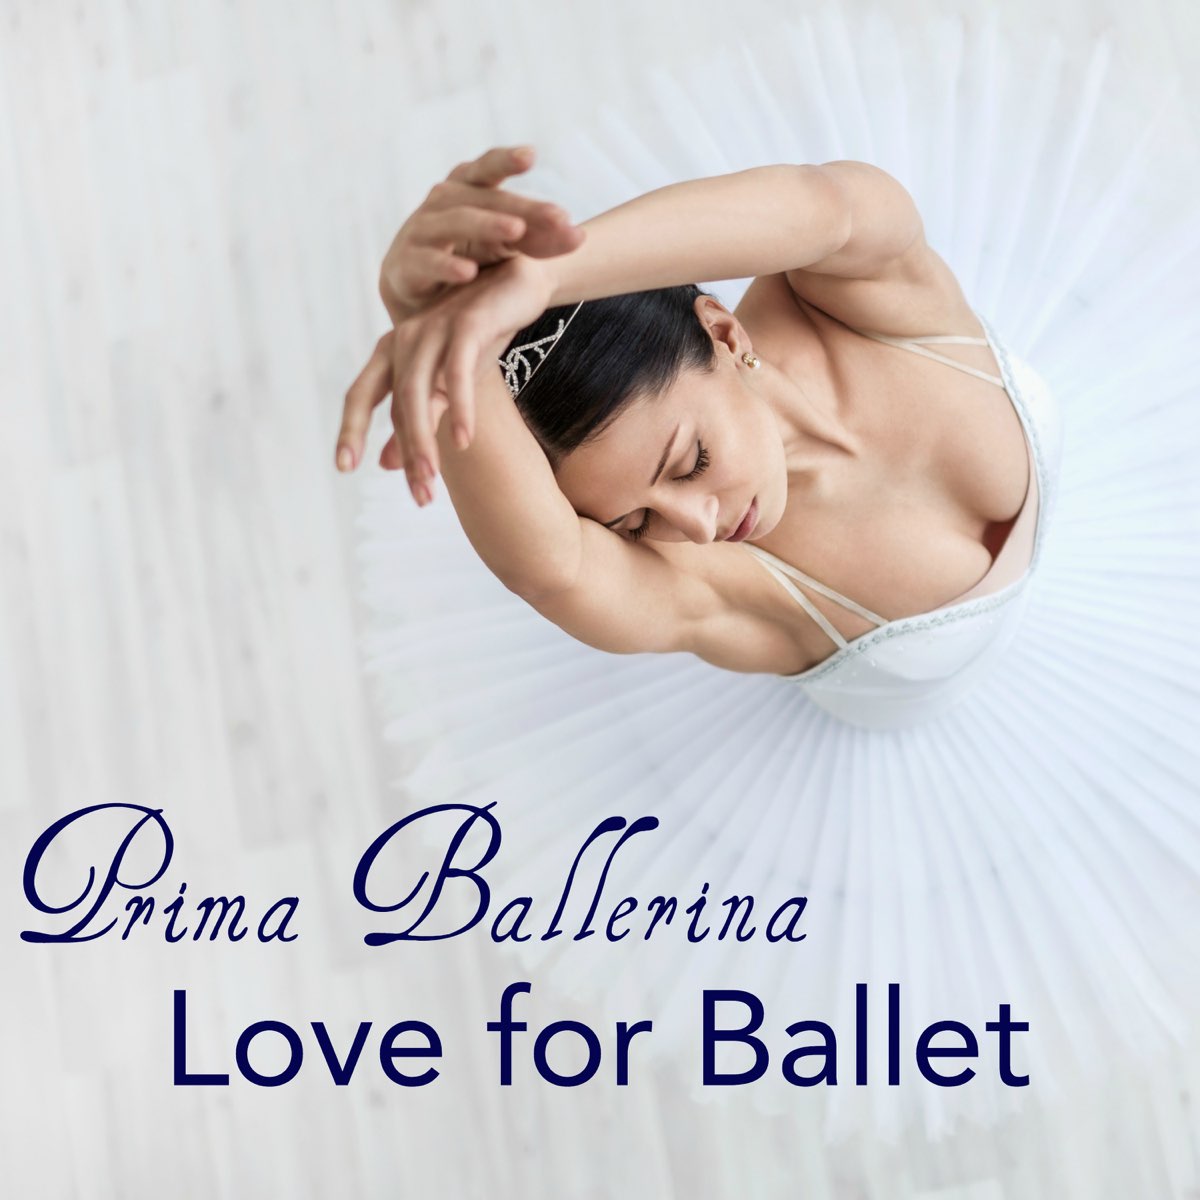 Prima Ballerina, Love for Ballet – Instrumental Music for Ballet Classes  and Choreography by Ballet Dance Company on Apple Music